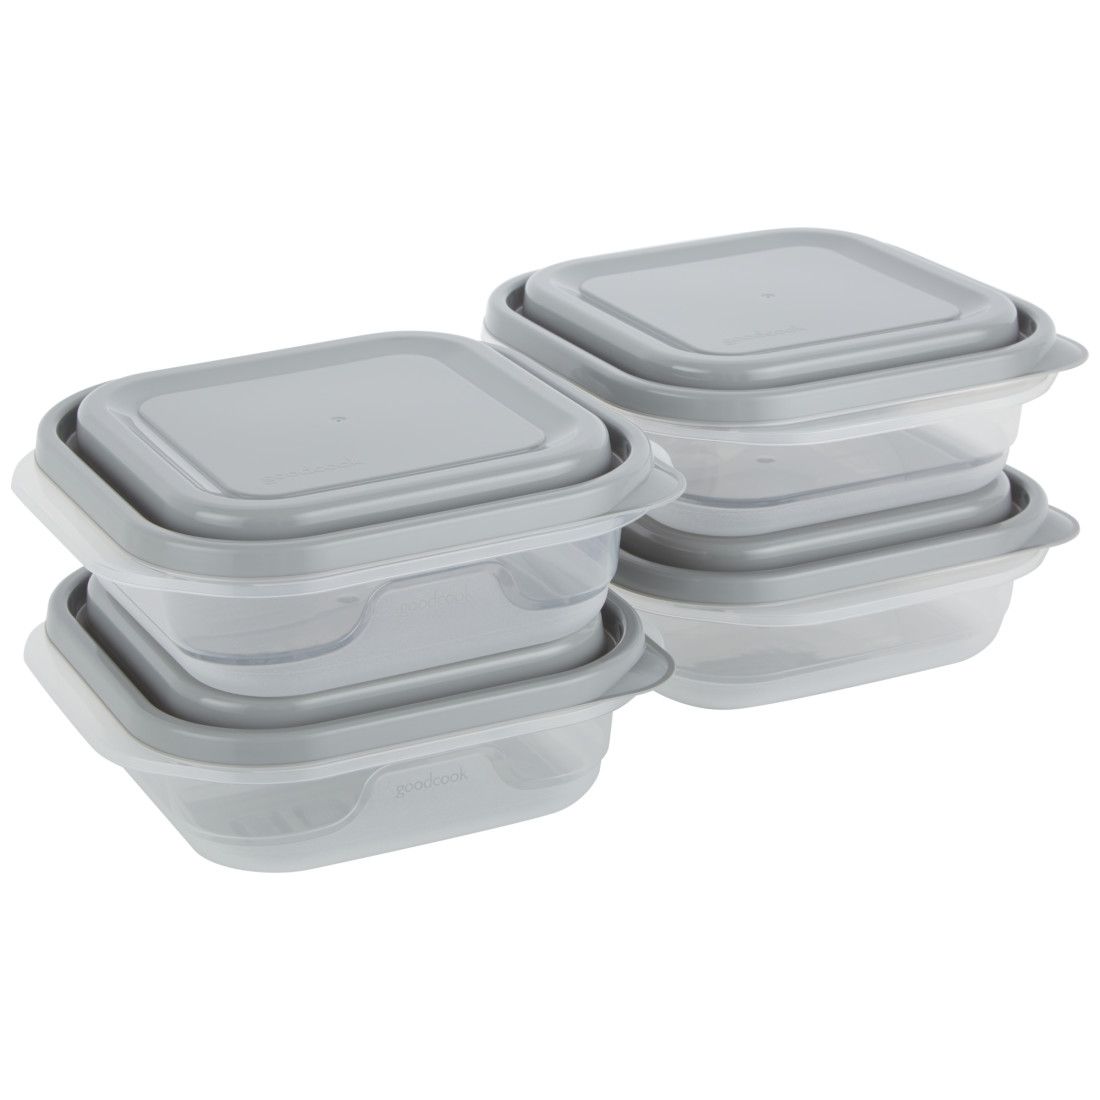 Rectangular Food Container Meal Prep Set 2 x 2.9 cup + 2 x 2 cup